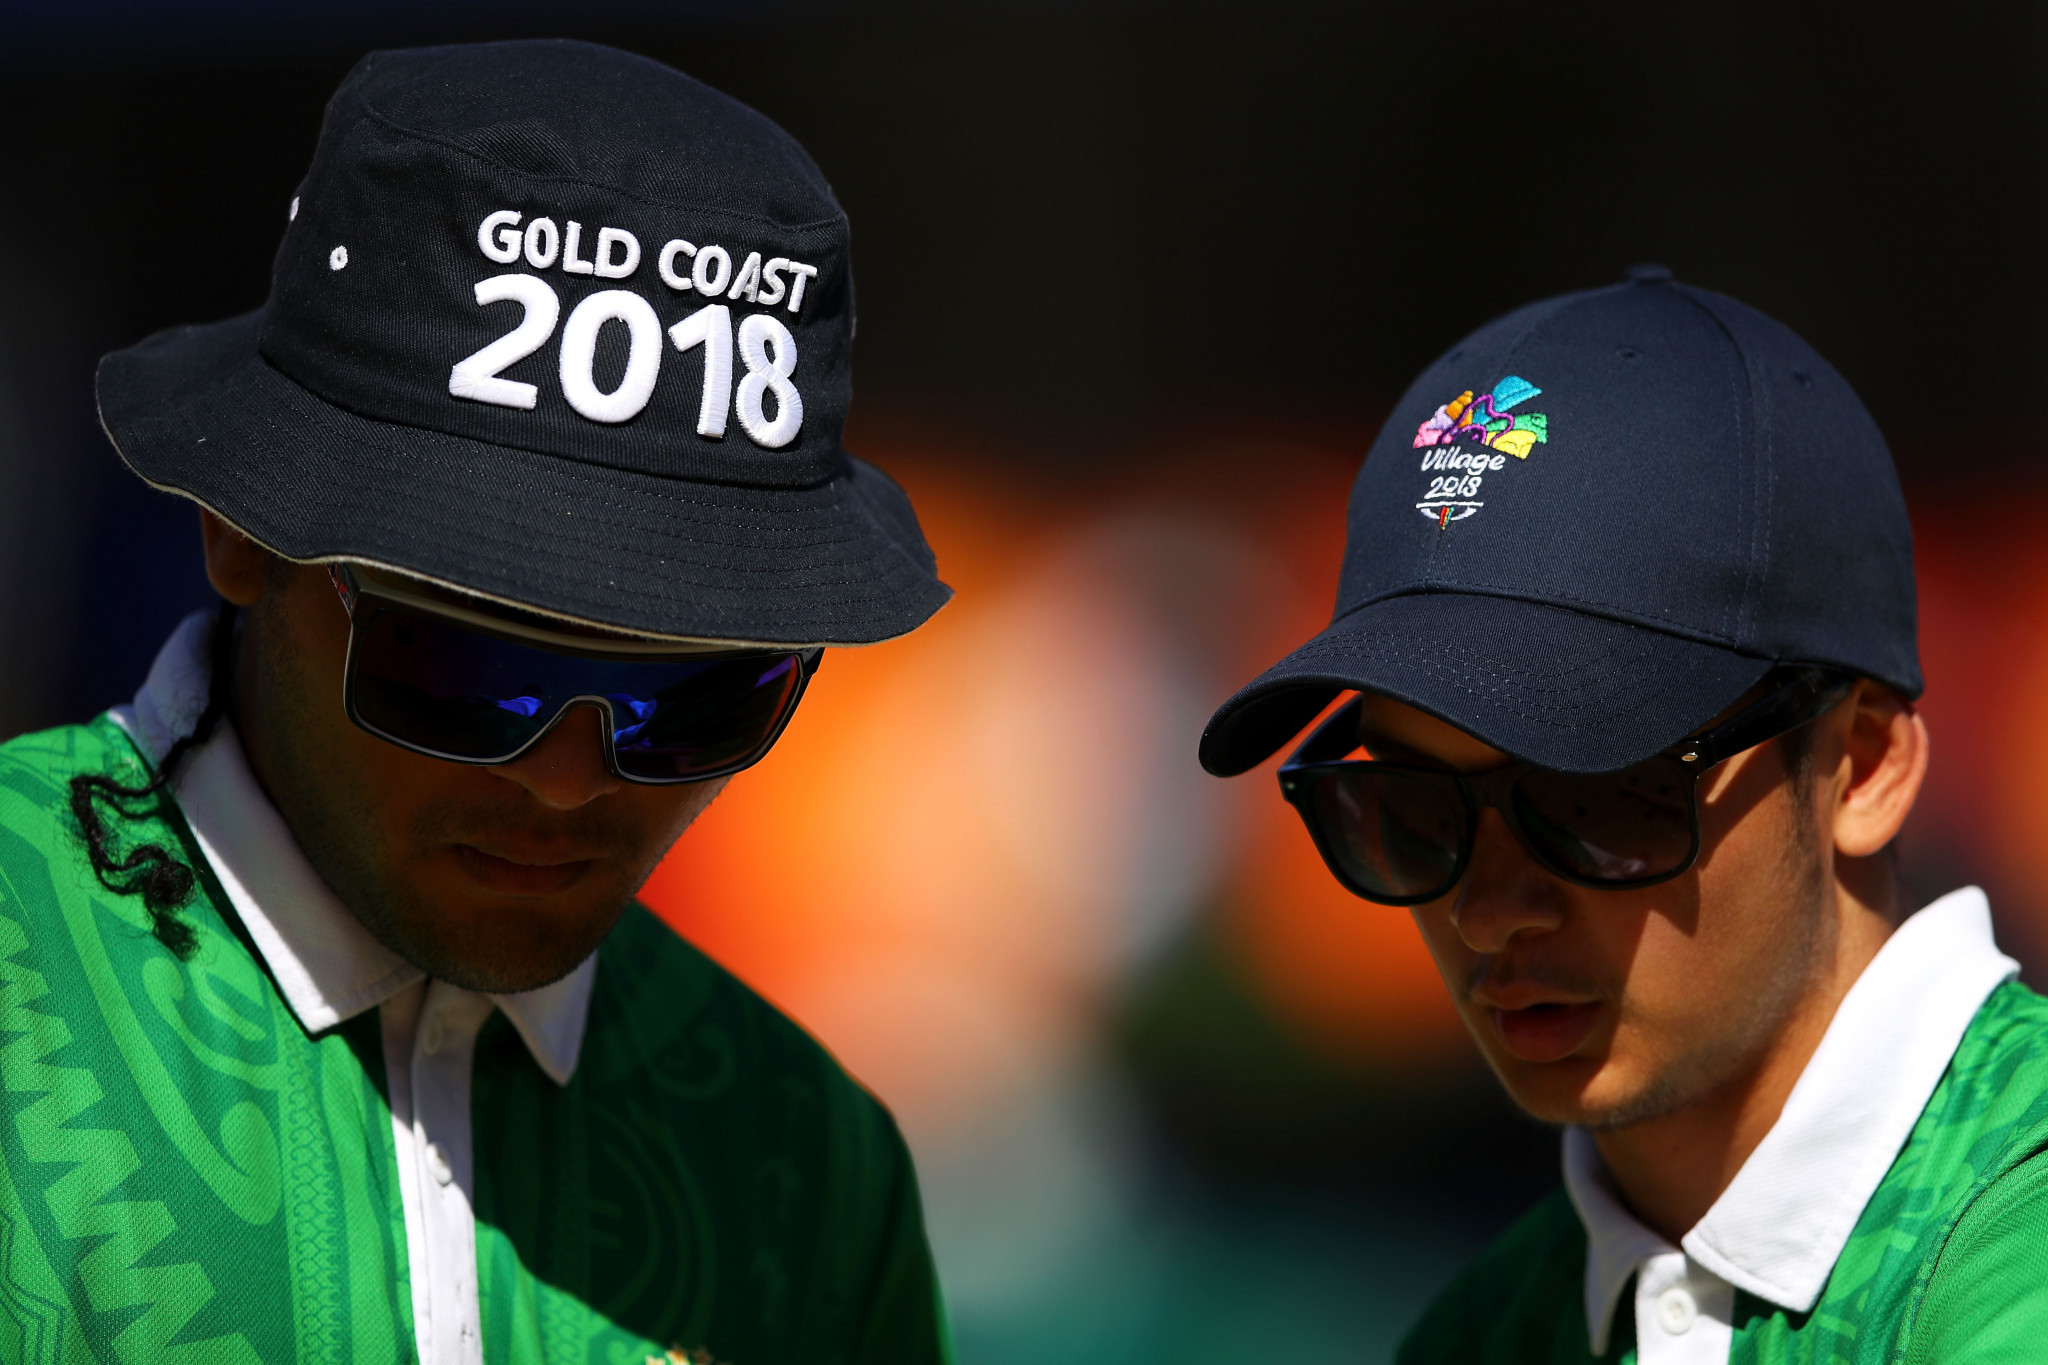 Taiki Paniani and Aidan Zittersteijn won bronze in lawn bowls for the Cook Islands at Gold Coast 2018 ©Getty Images